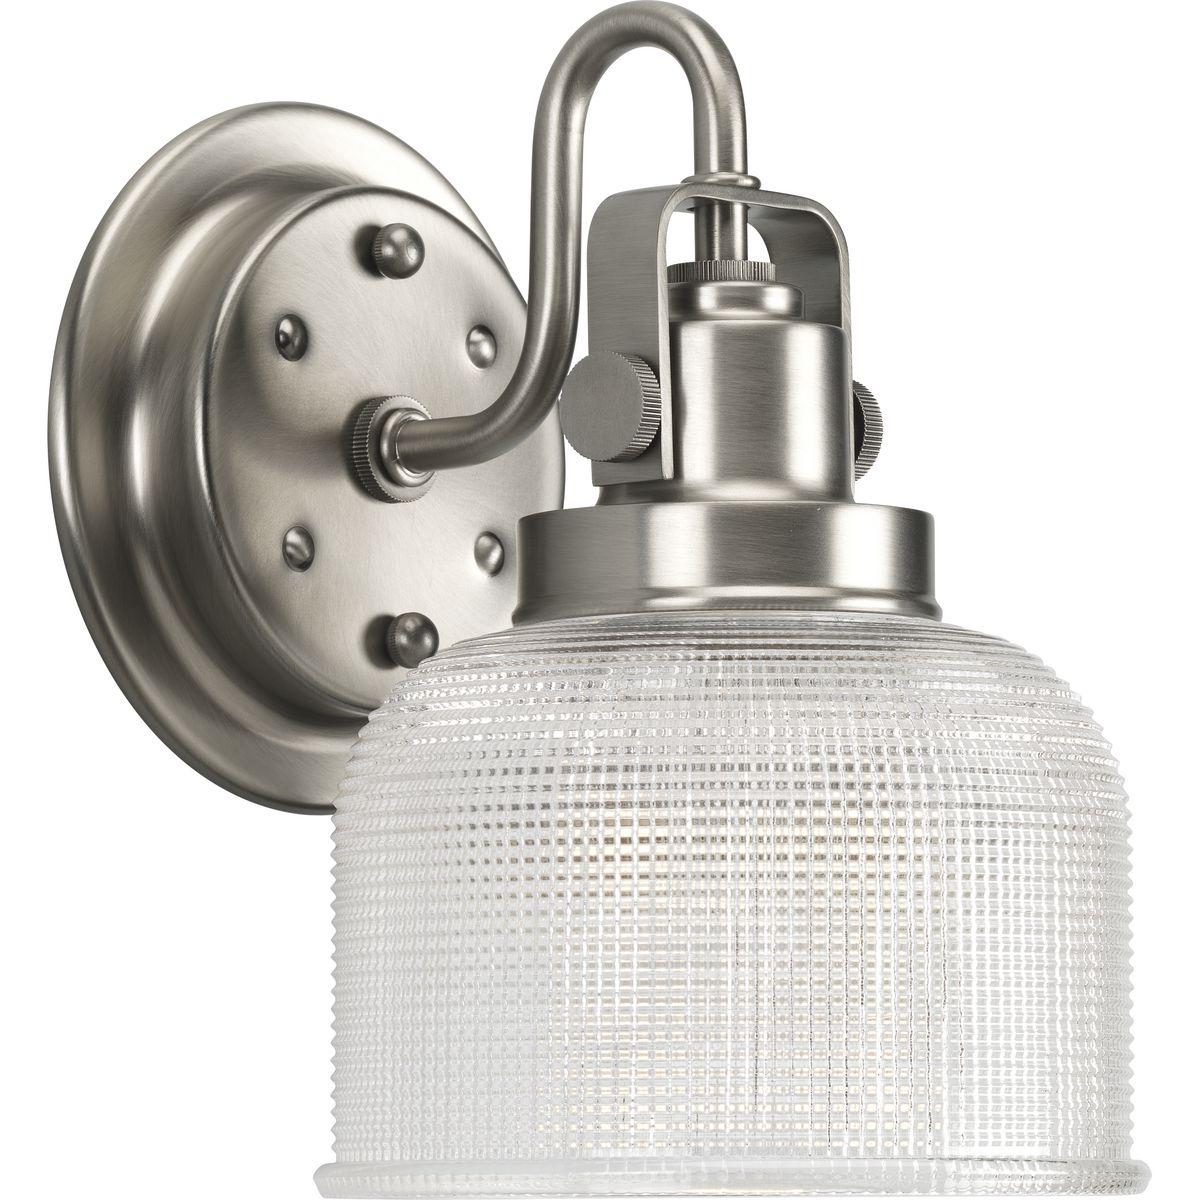 Hubbell P2989-81 Archie is a standout in any room and provides a fun and fashionable way to light your home. The authentic, prismatic style glass shade diffuses light to provide functional and stylish illumination. Finely crafted strap and knob details are conveyed by the